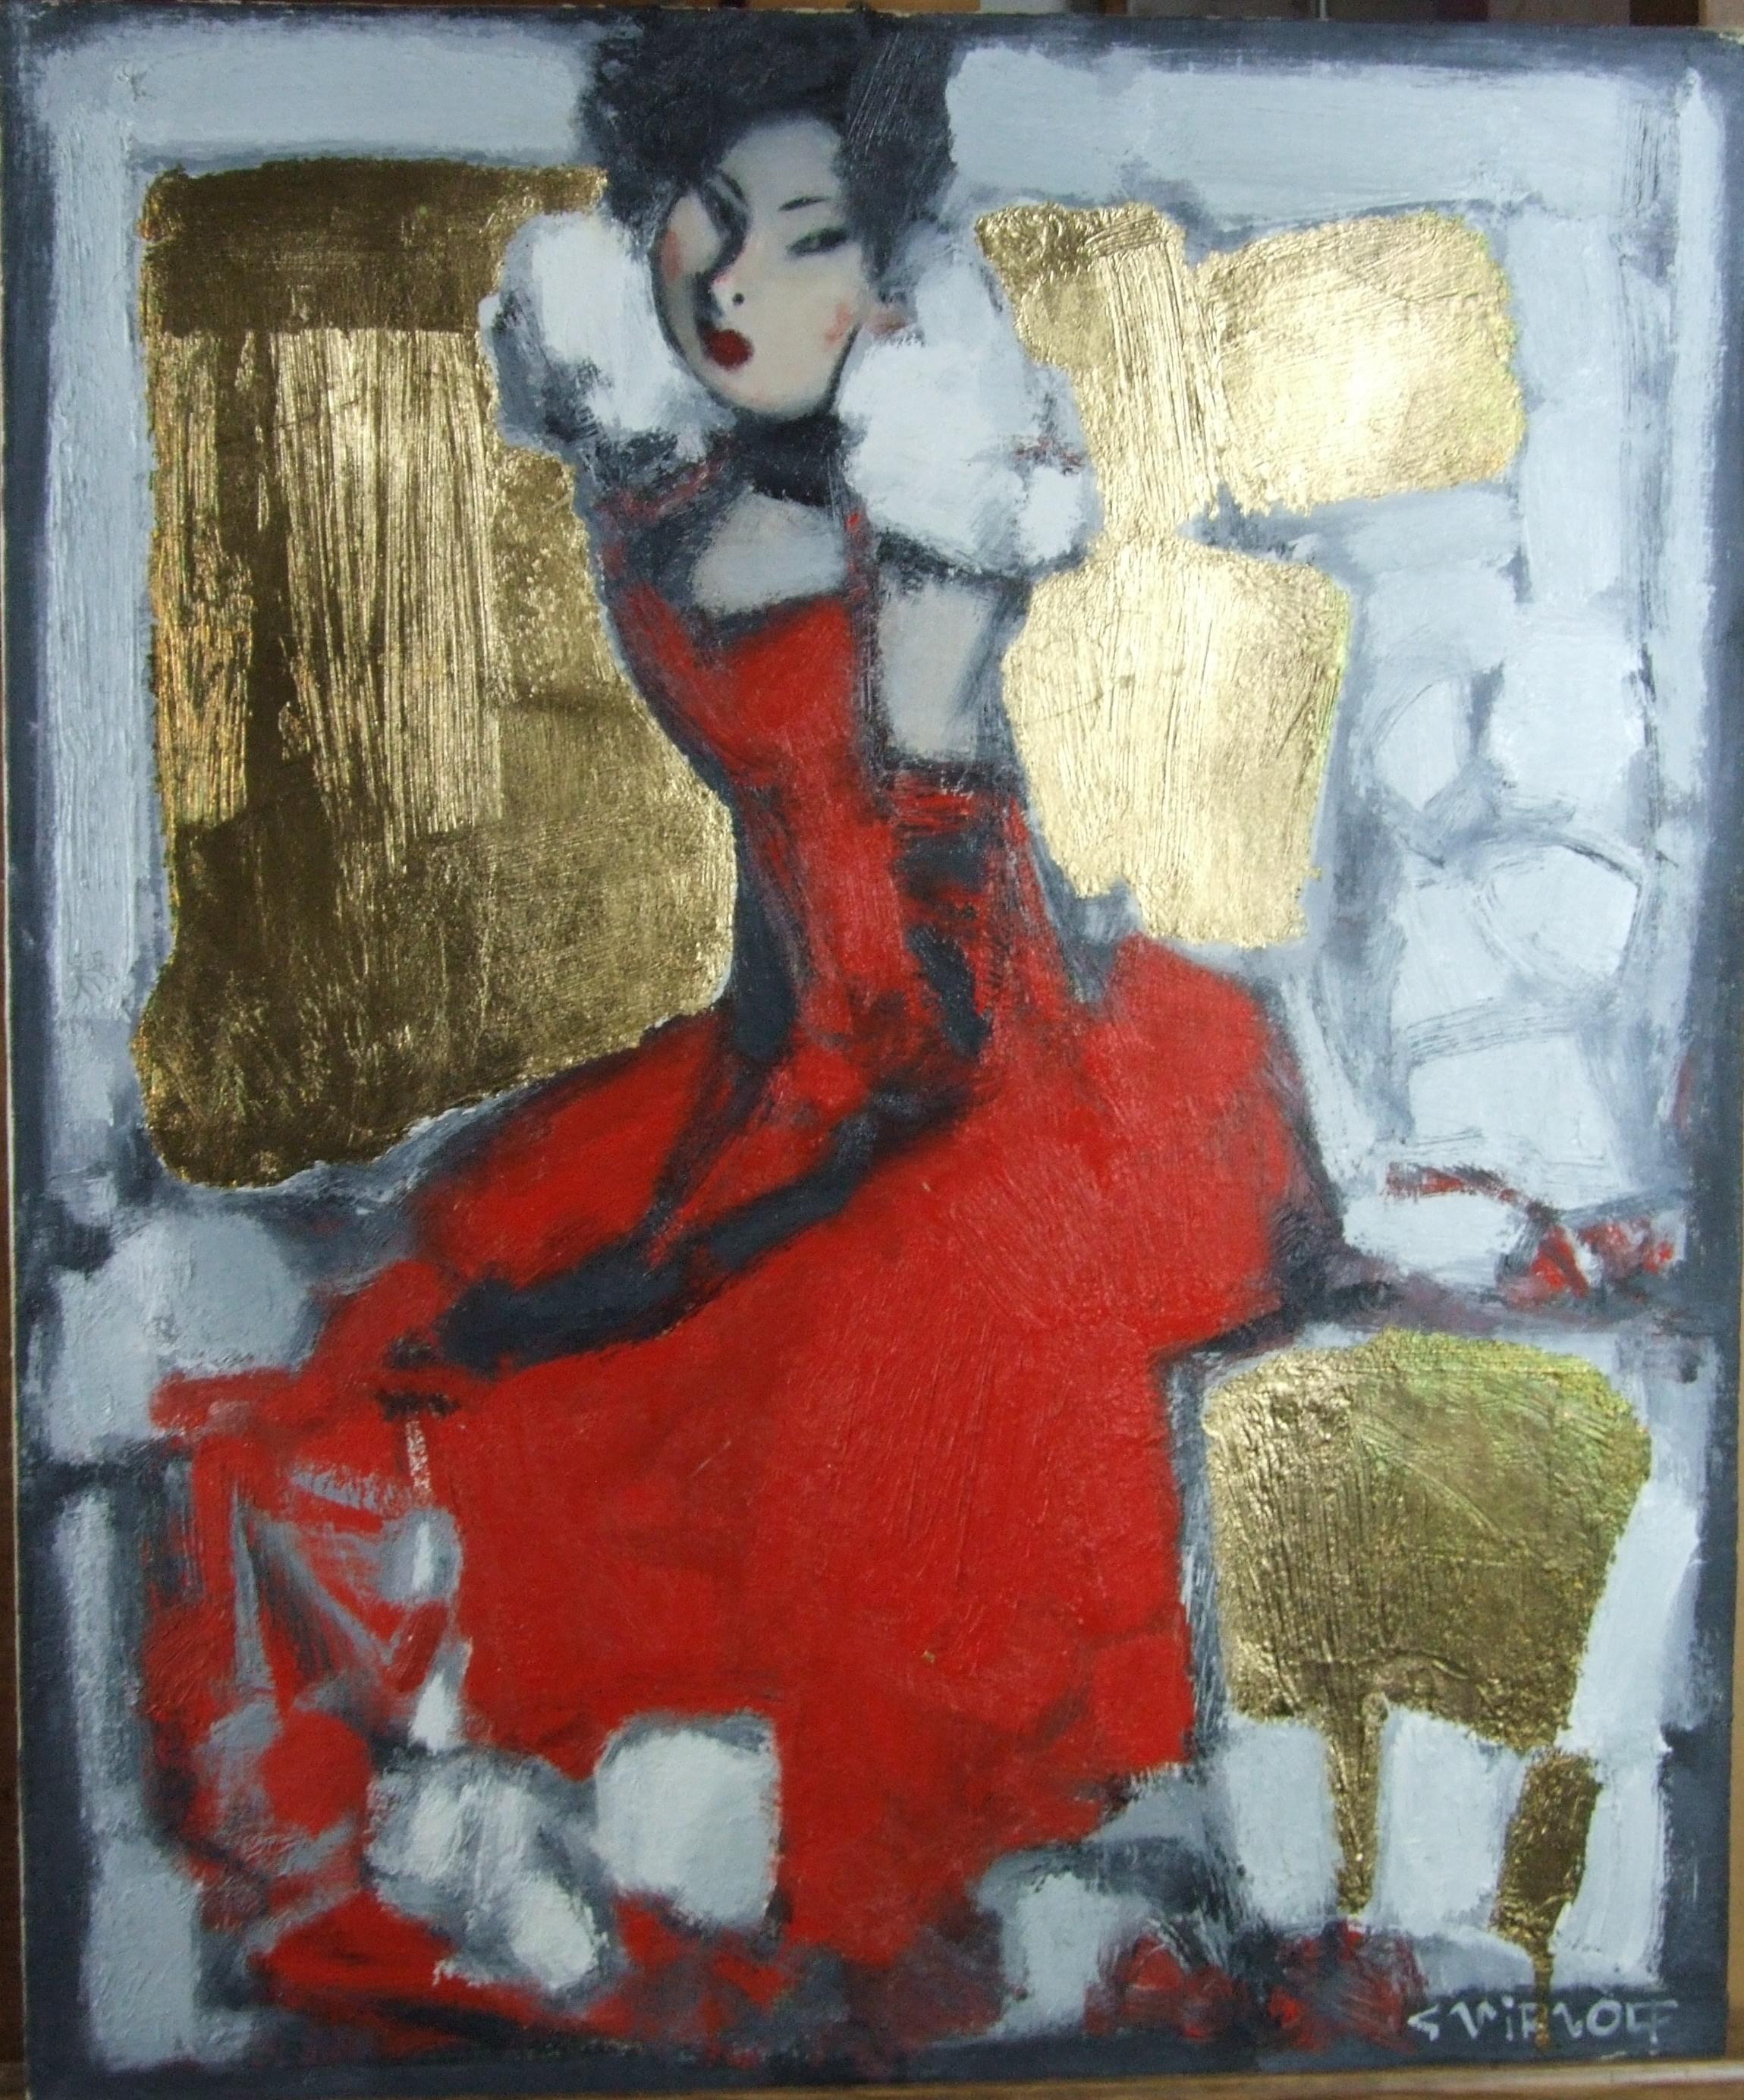 Smirnoff Andrej Figurative Painting - The red dress, 2006 - Oil on canvas, 60x50 cm.